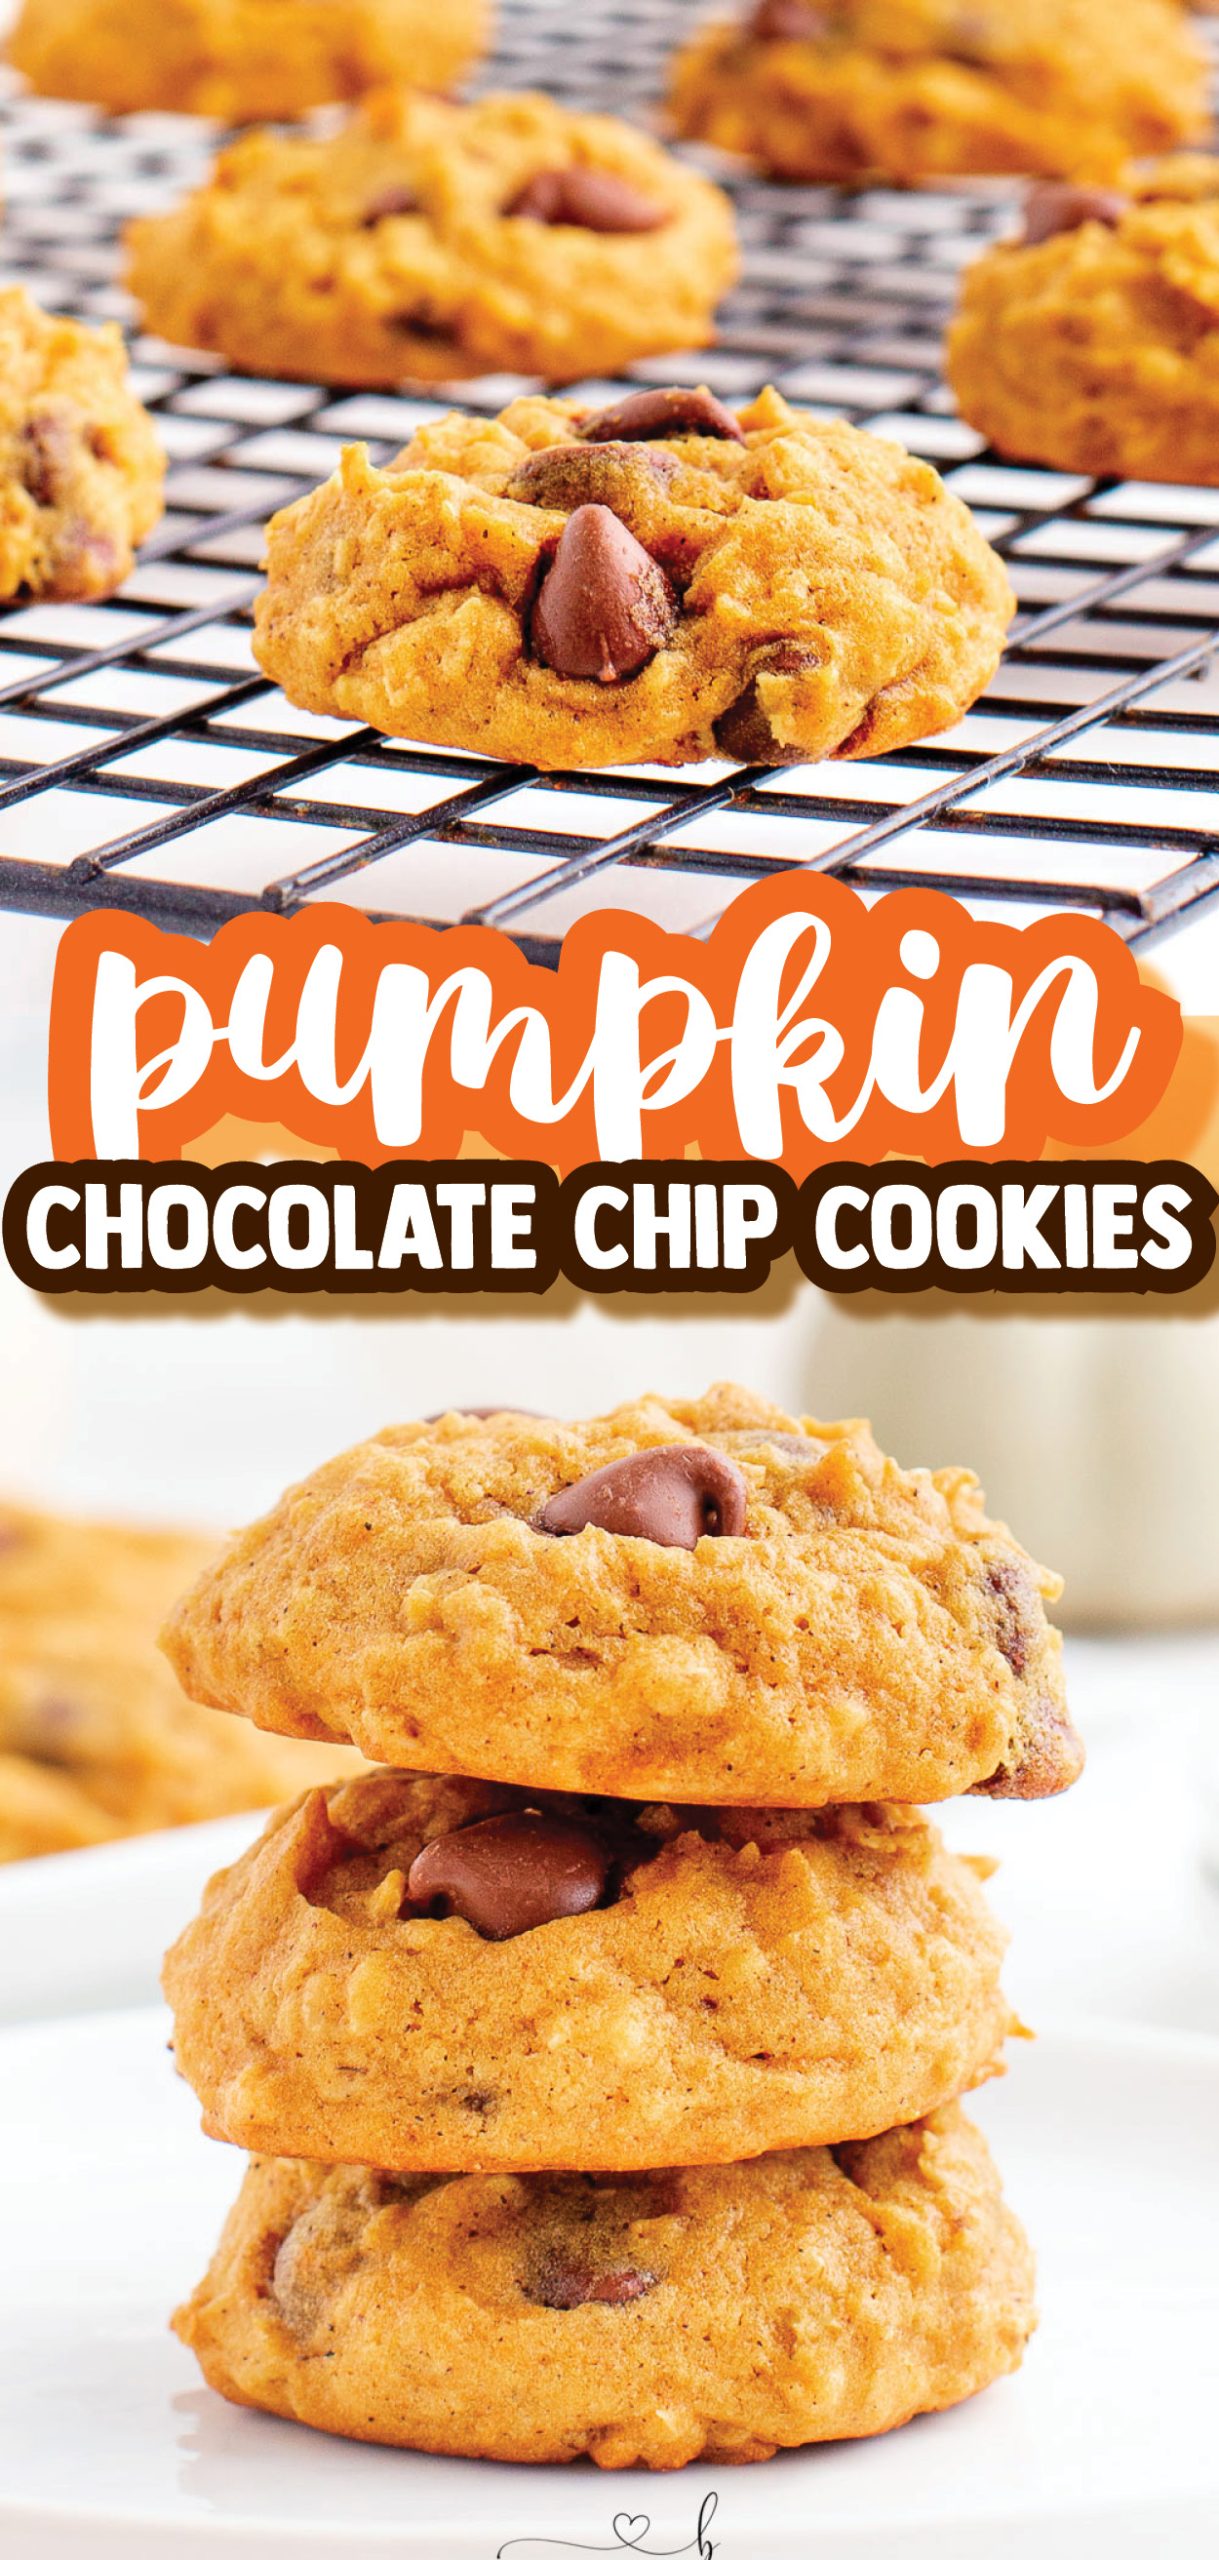 Pumpkin Chocolate Chip Cookies are soft and chewy with just the perfect amount of pumpkin flavor and chocolate chips!